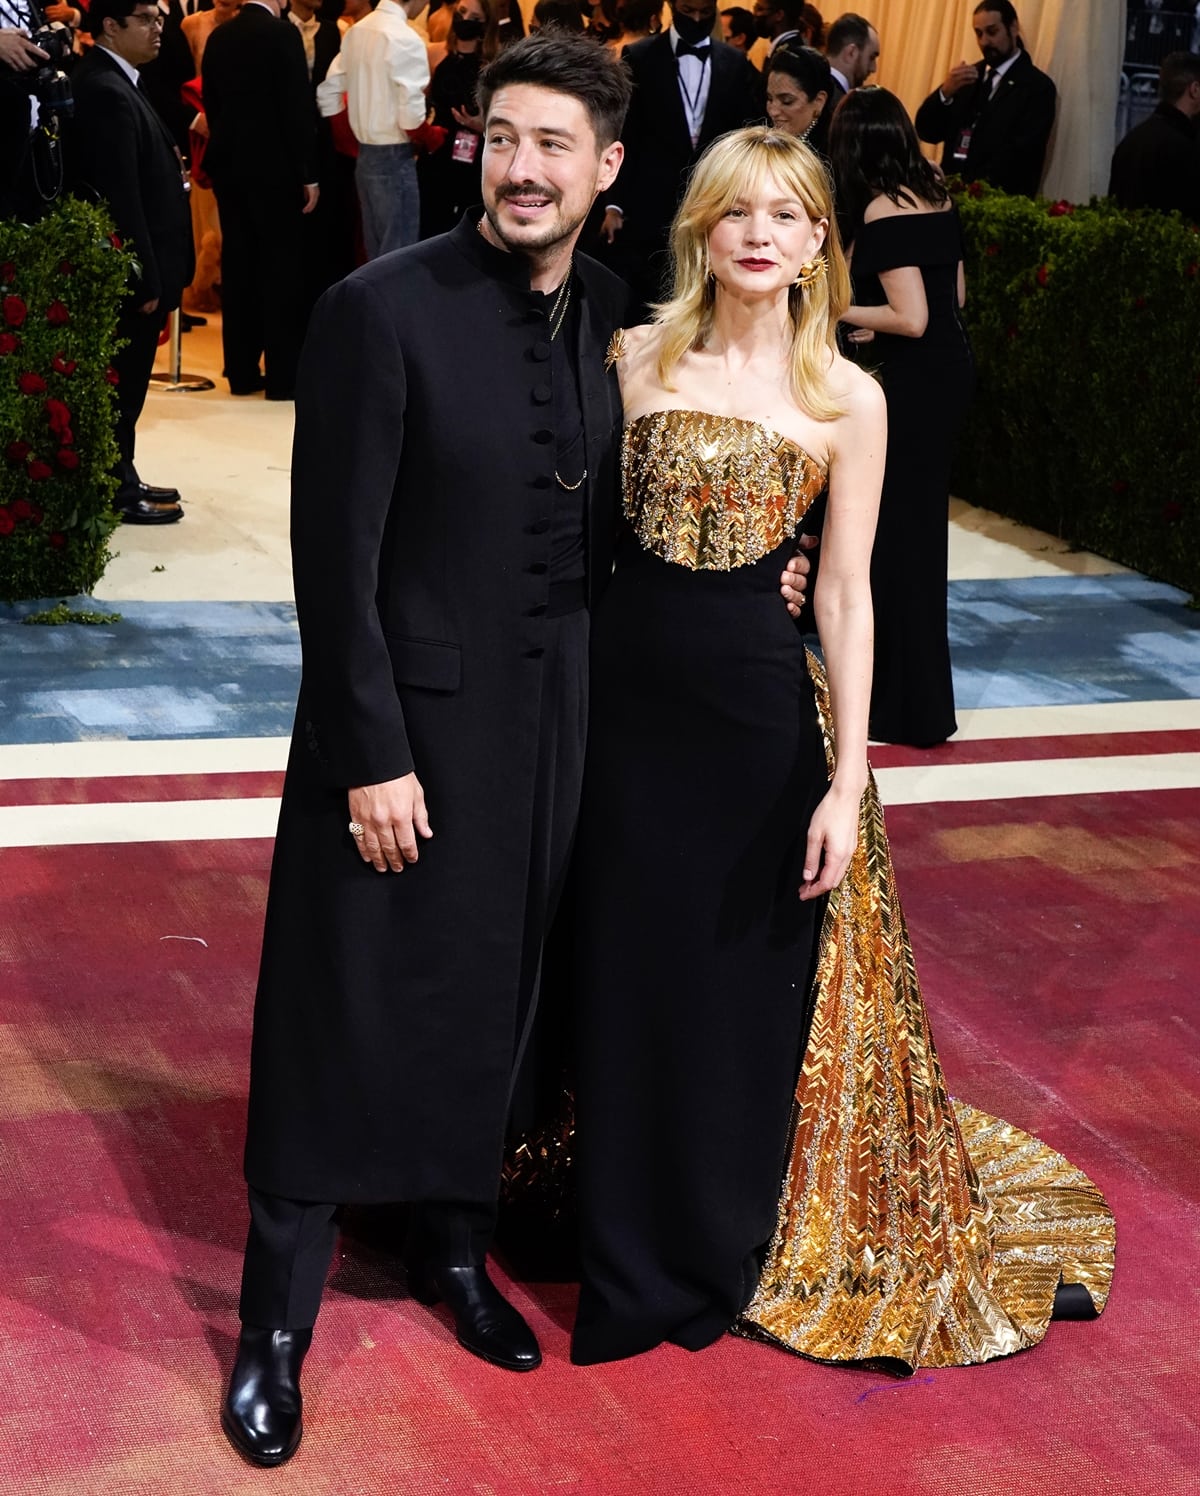 Towering at 5'11 ½", Marcus Mumford and his partner Carey Mulligan, two years his senior at 5'6", graced the 2022 Met Gala with their distinct yet complementary fashion choices, showcasing their elegant styles